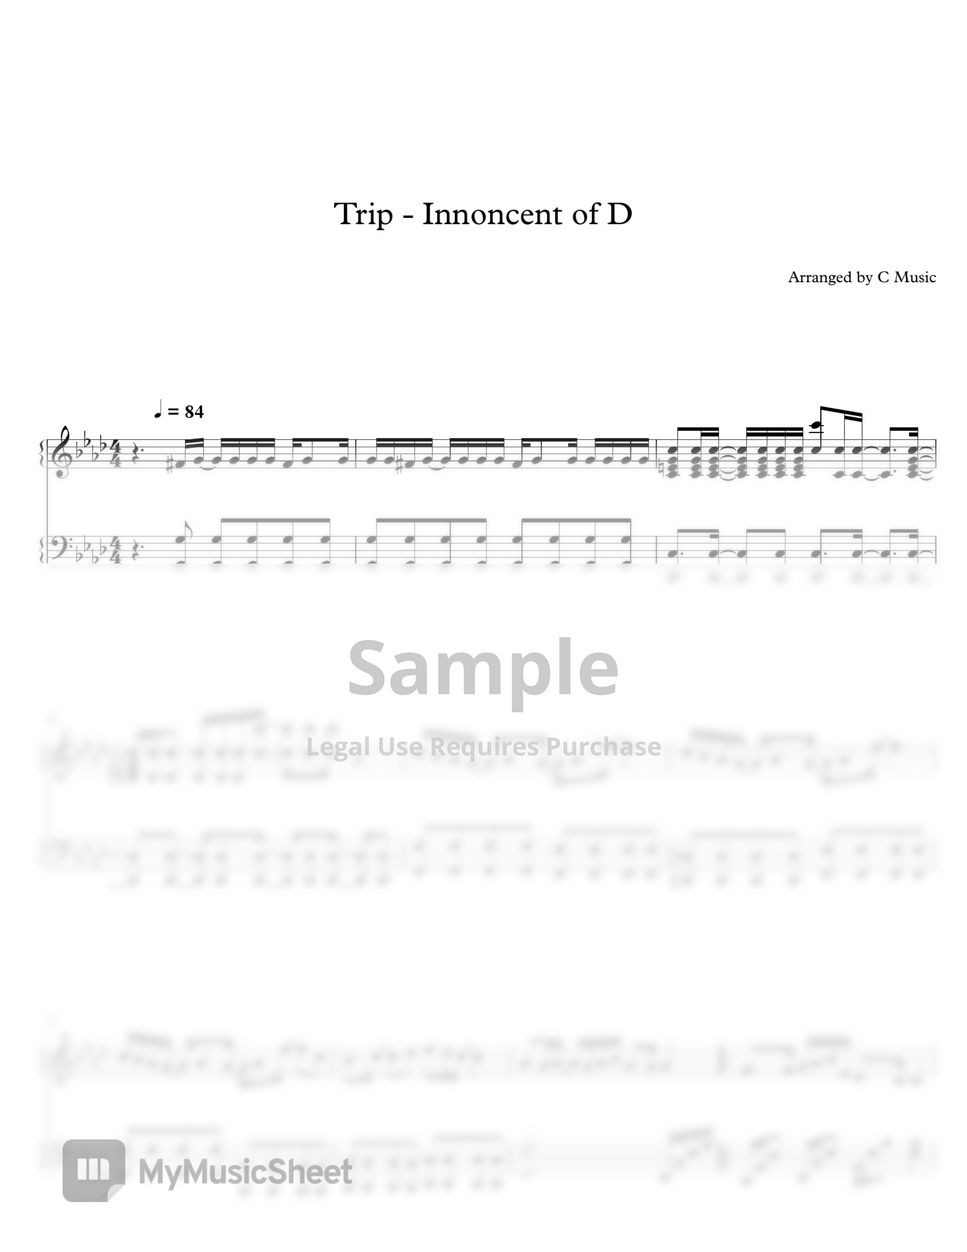 Trip - Innocent of D by C Music